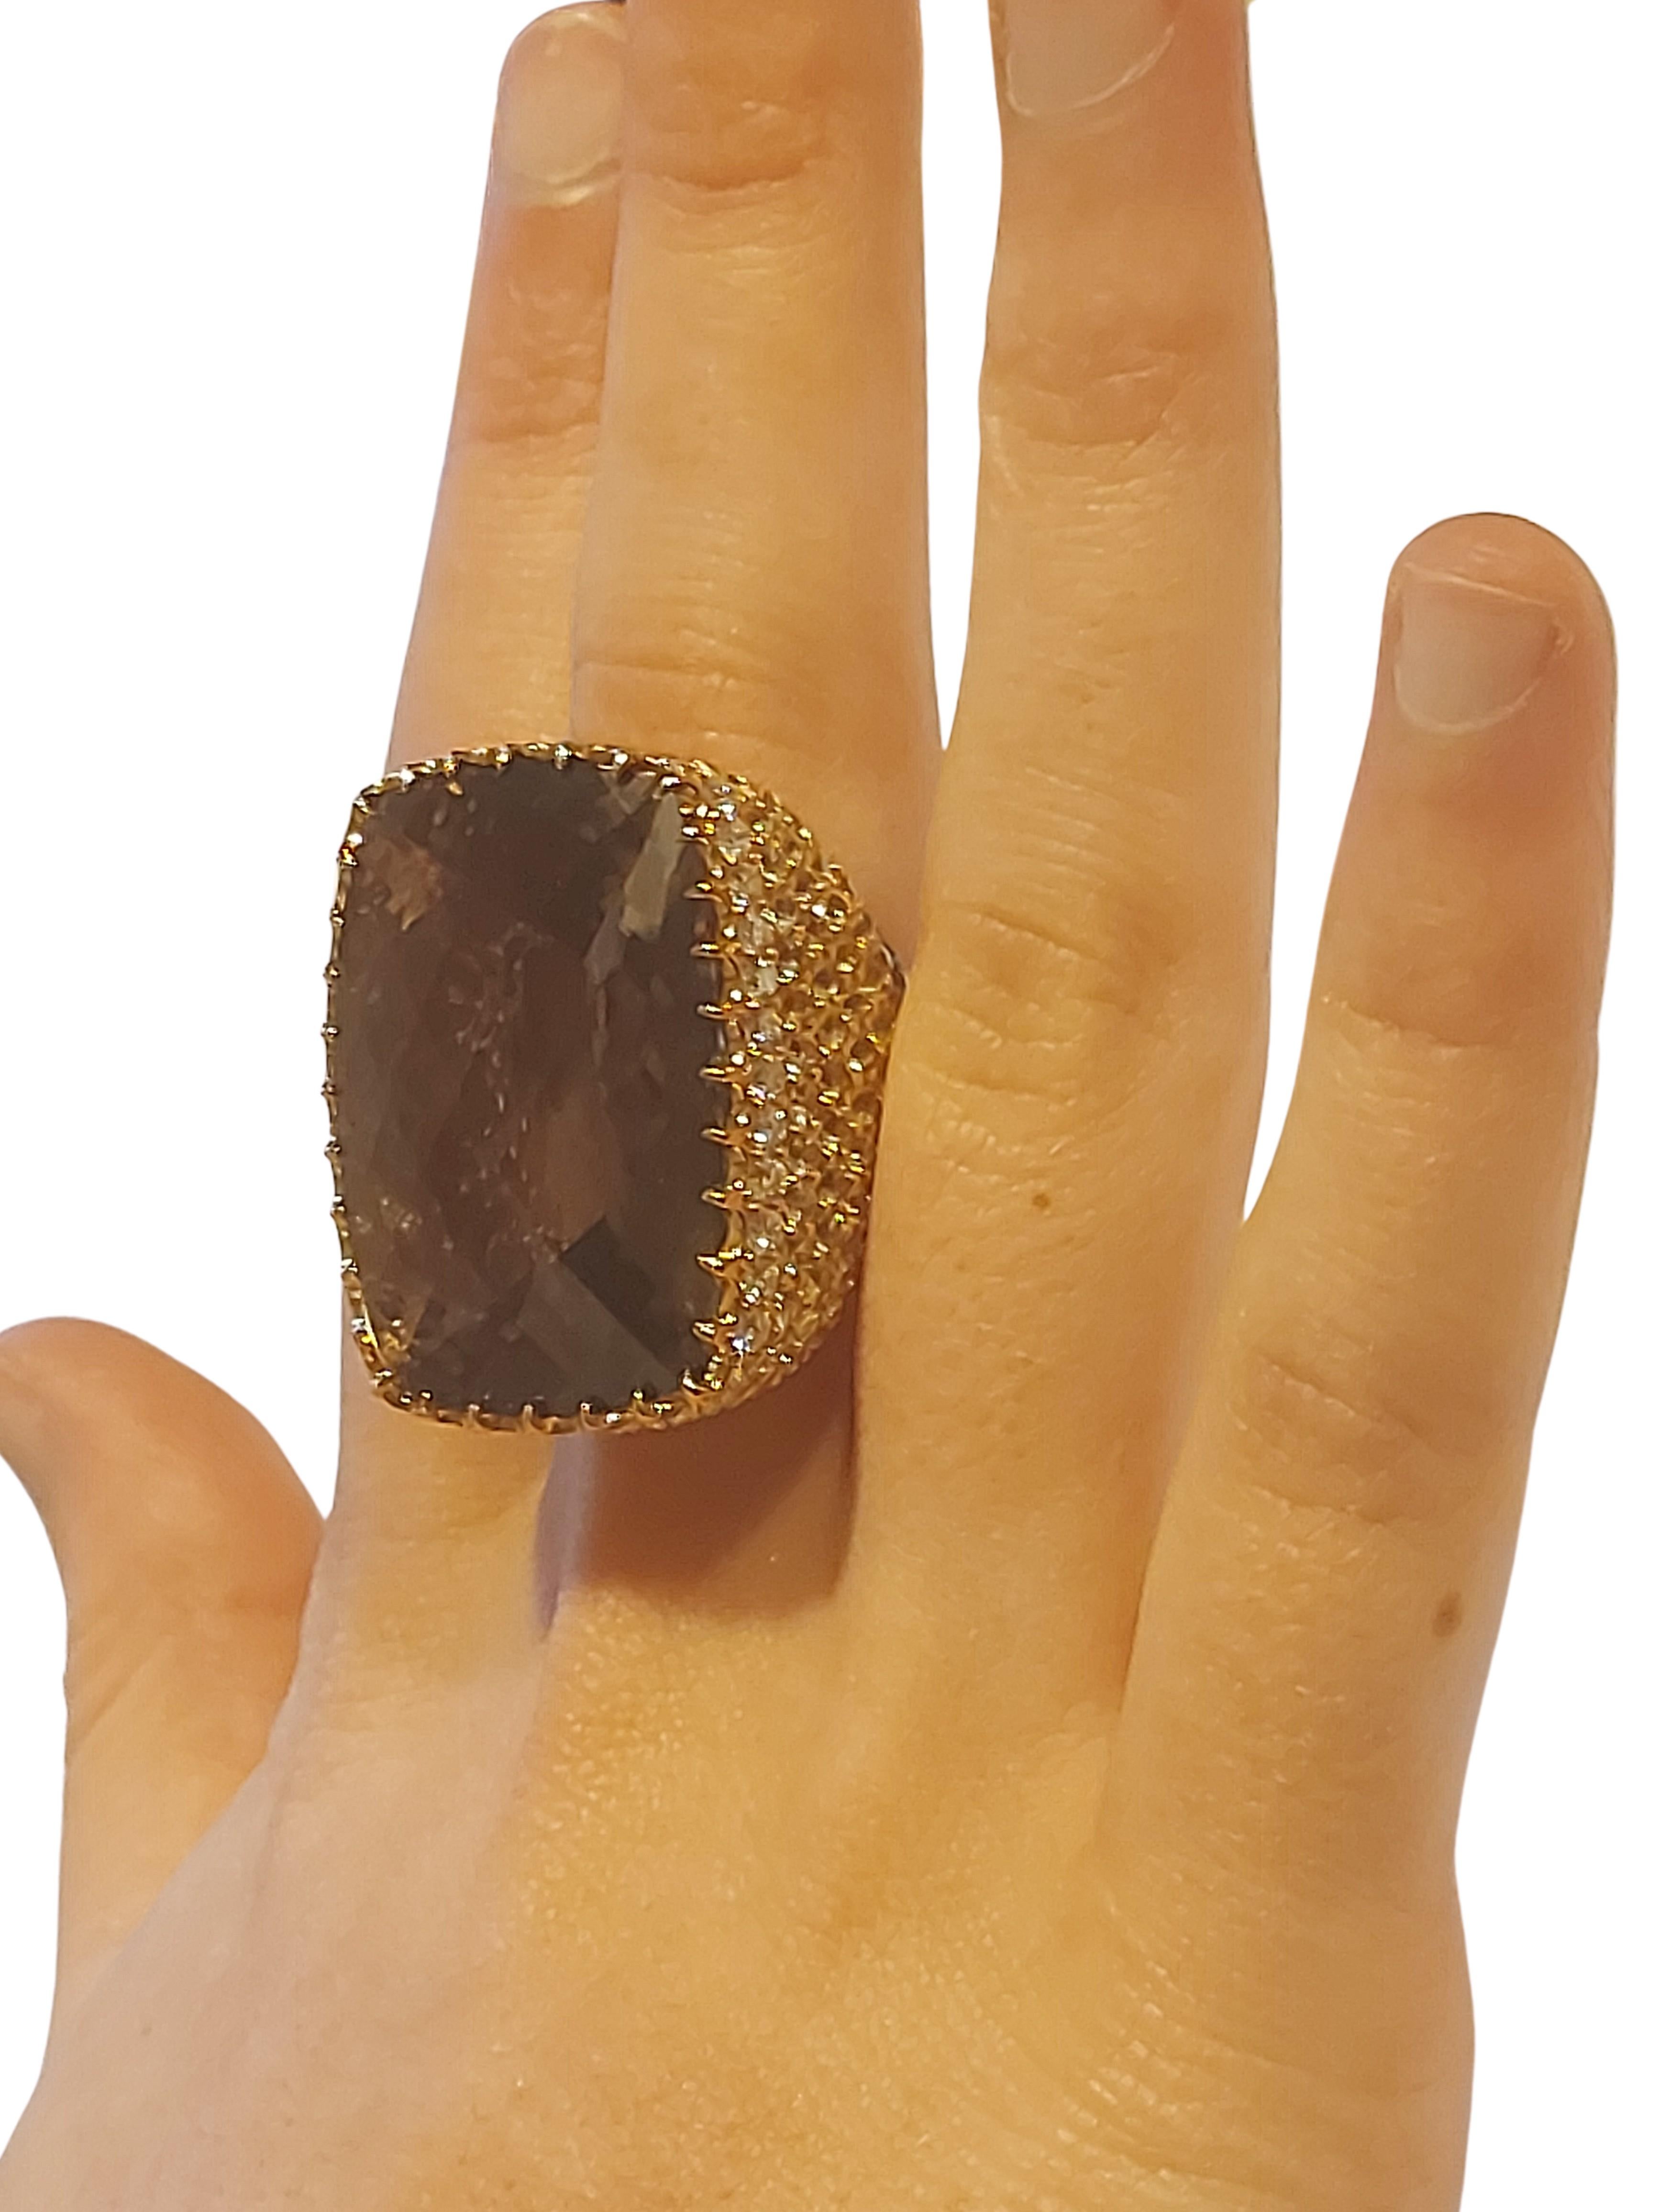 18kt Pink Gold Ring with a Large 36.5ct Topaz, 7.49ct Yellow Sapphires, Diamonds For Sale 6